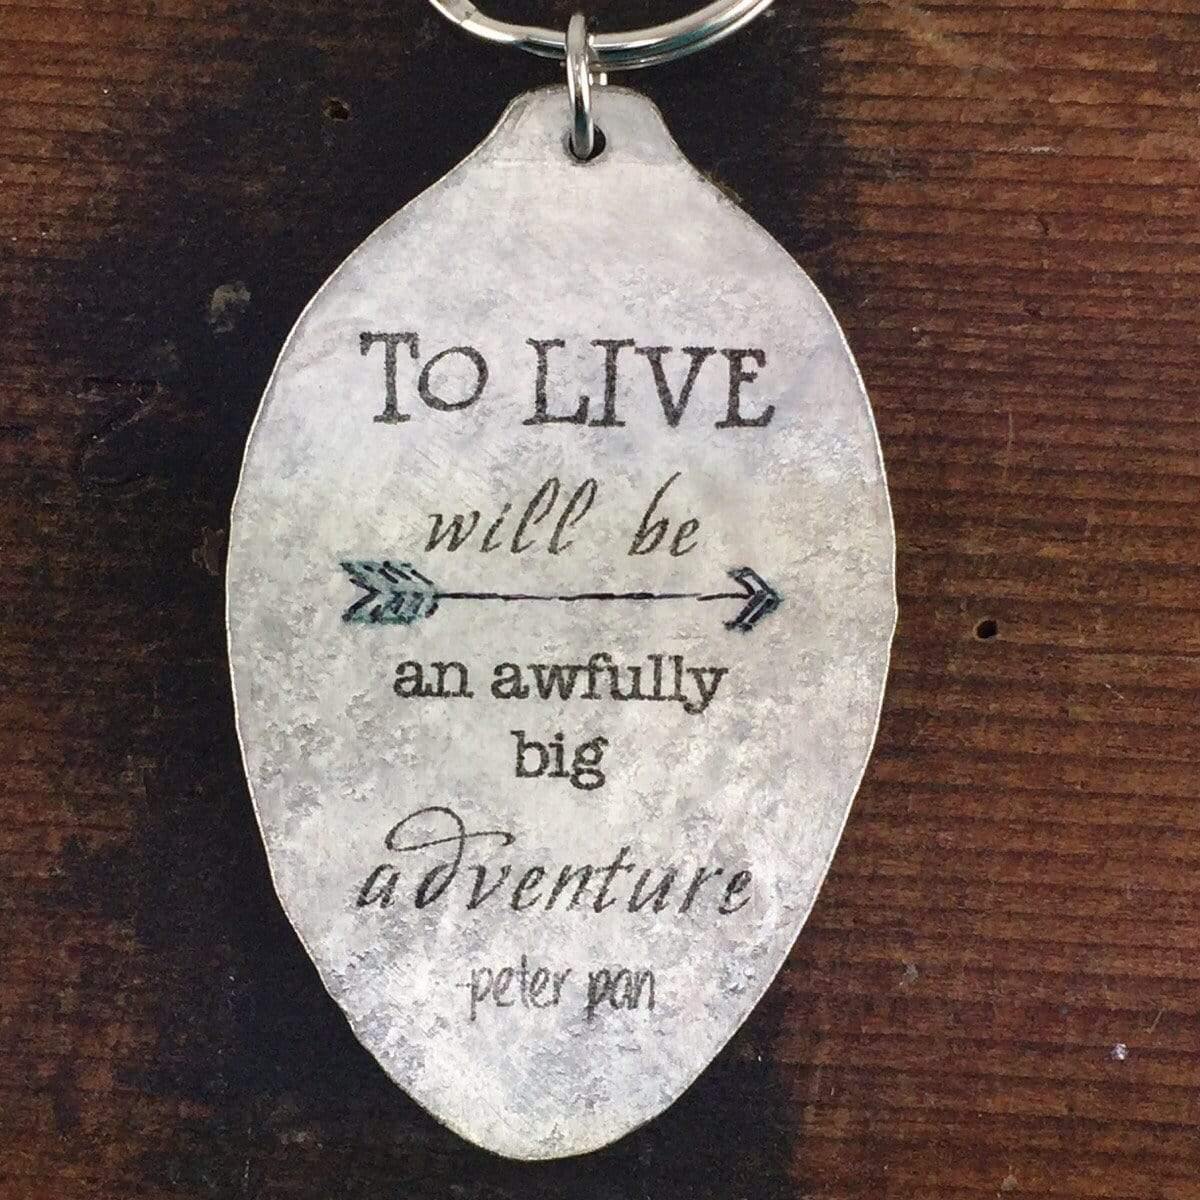 Peter Pan Quote Keychain made from a Vintage Silver Plate Teaspoon, To Live will be an Awfully big Adventure Inspiring Jewelry - KyleeMae Designs